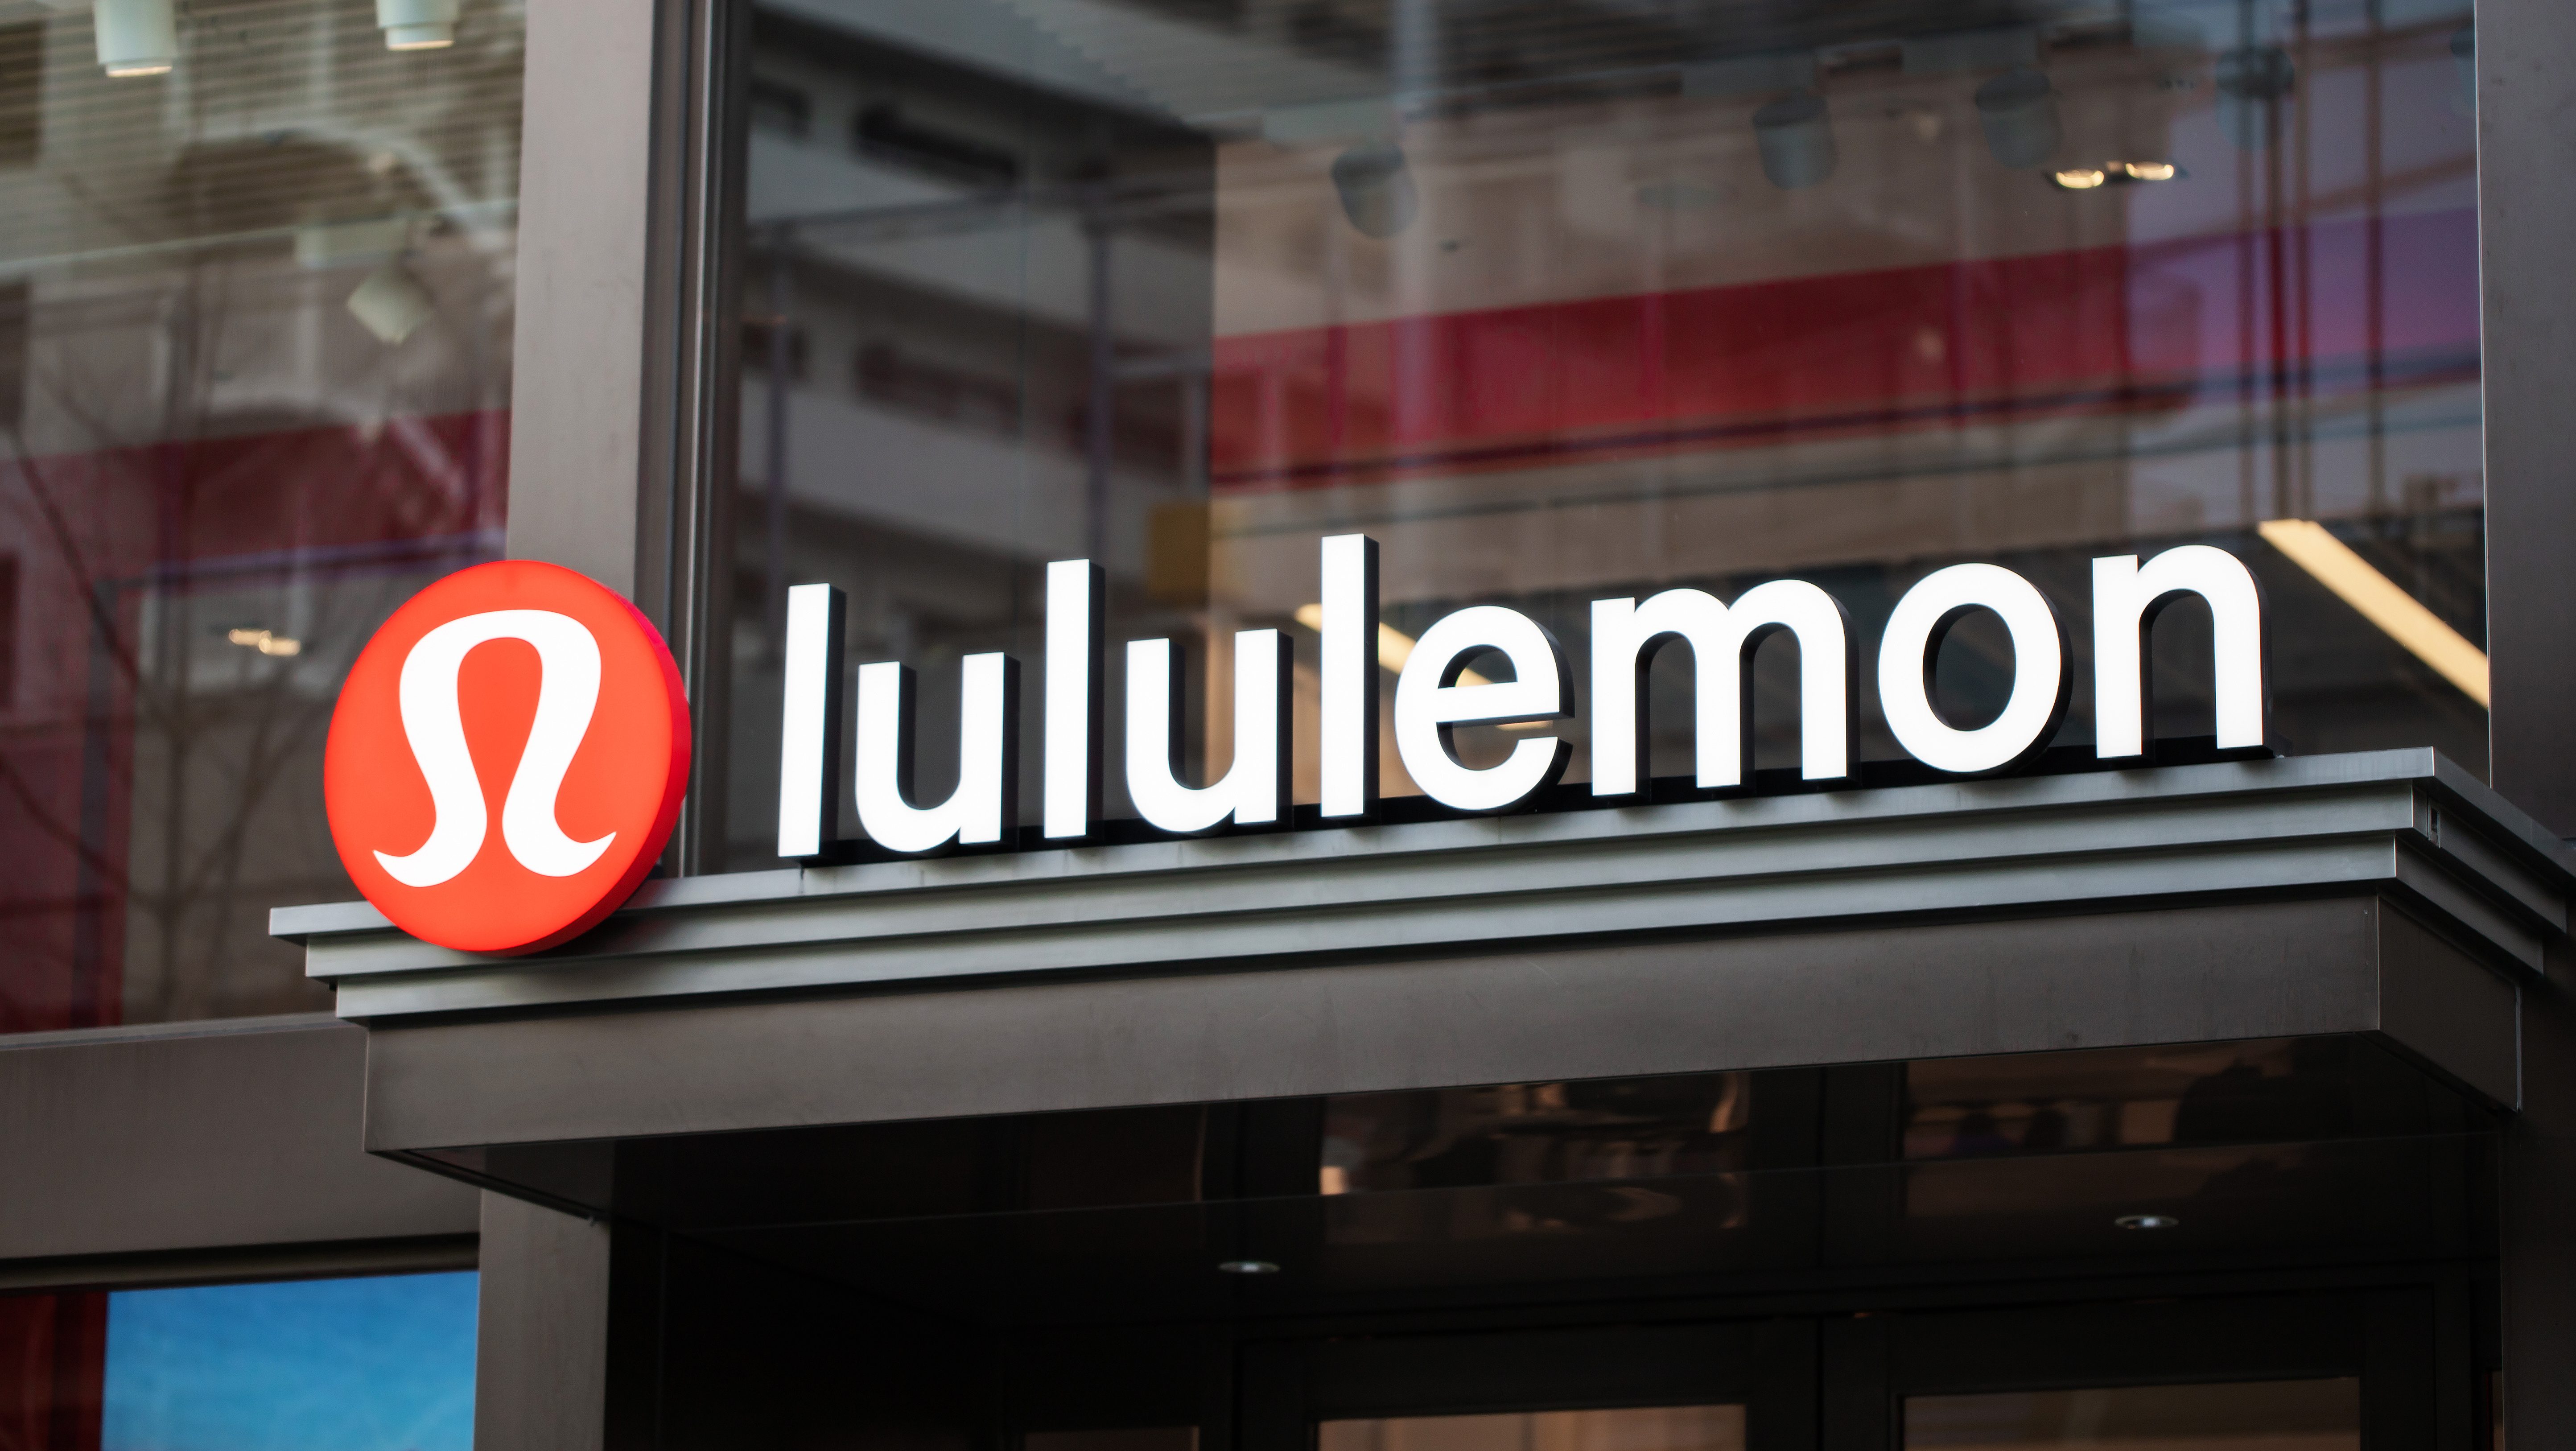 Current and former Lululemon employees accuse the brand of racial